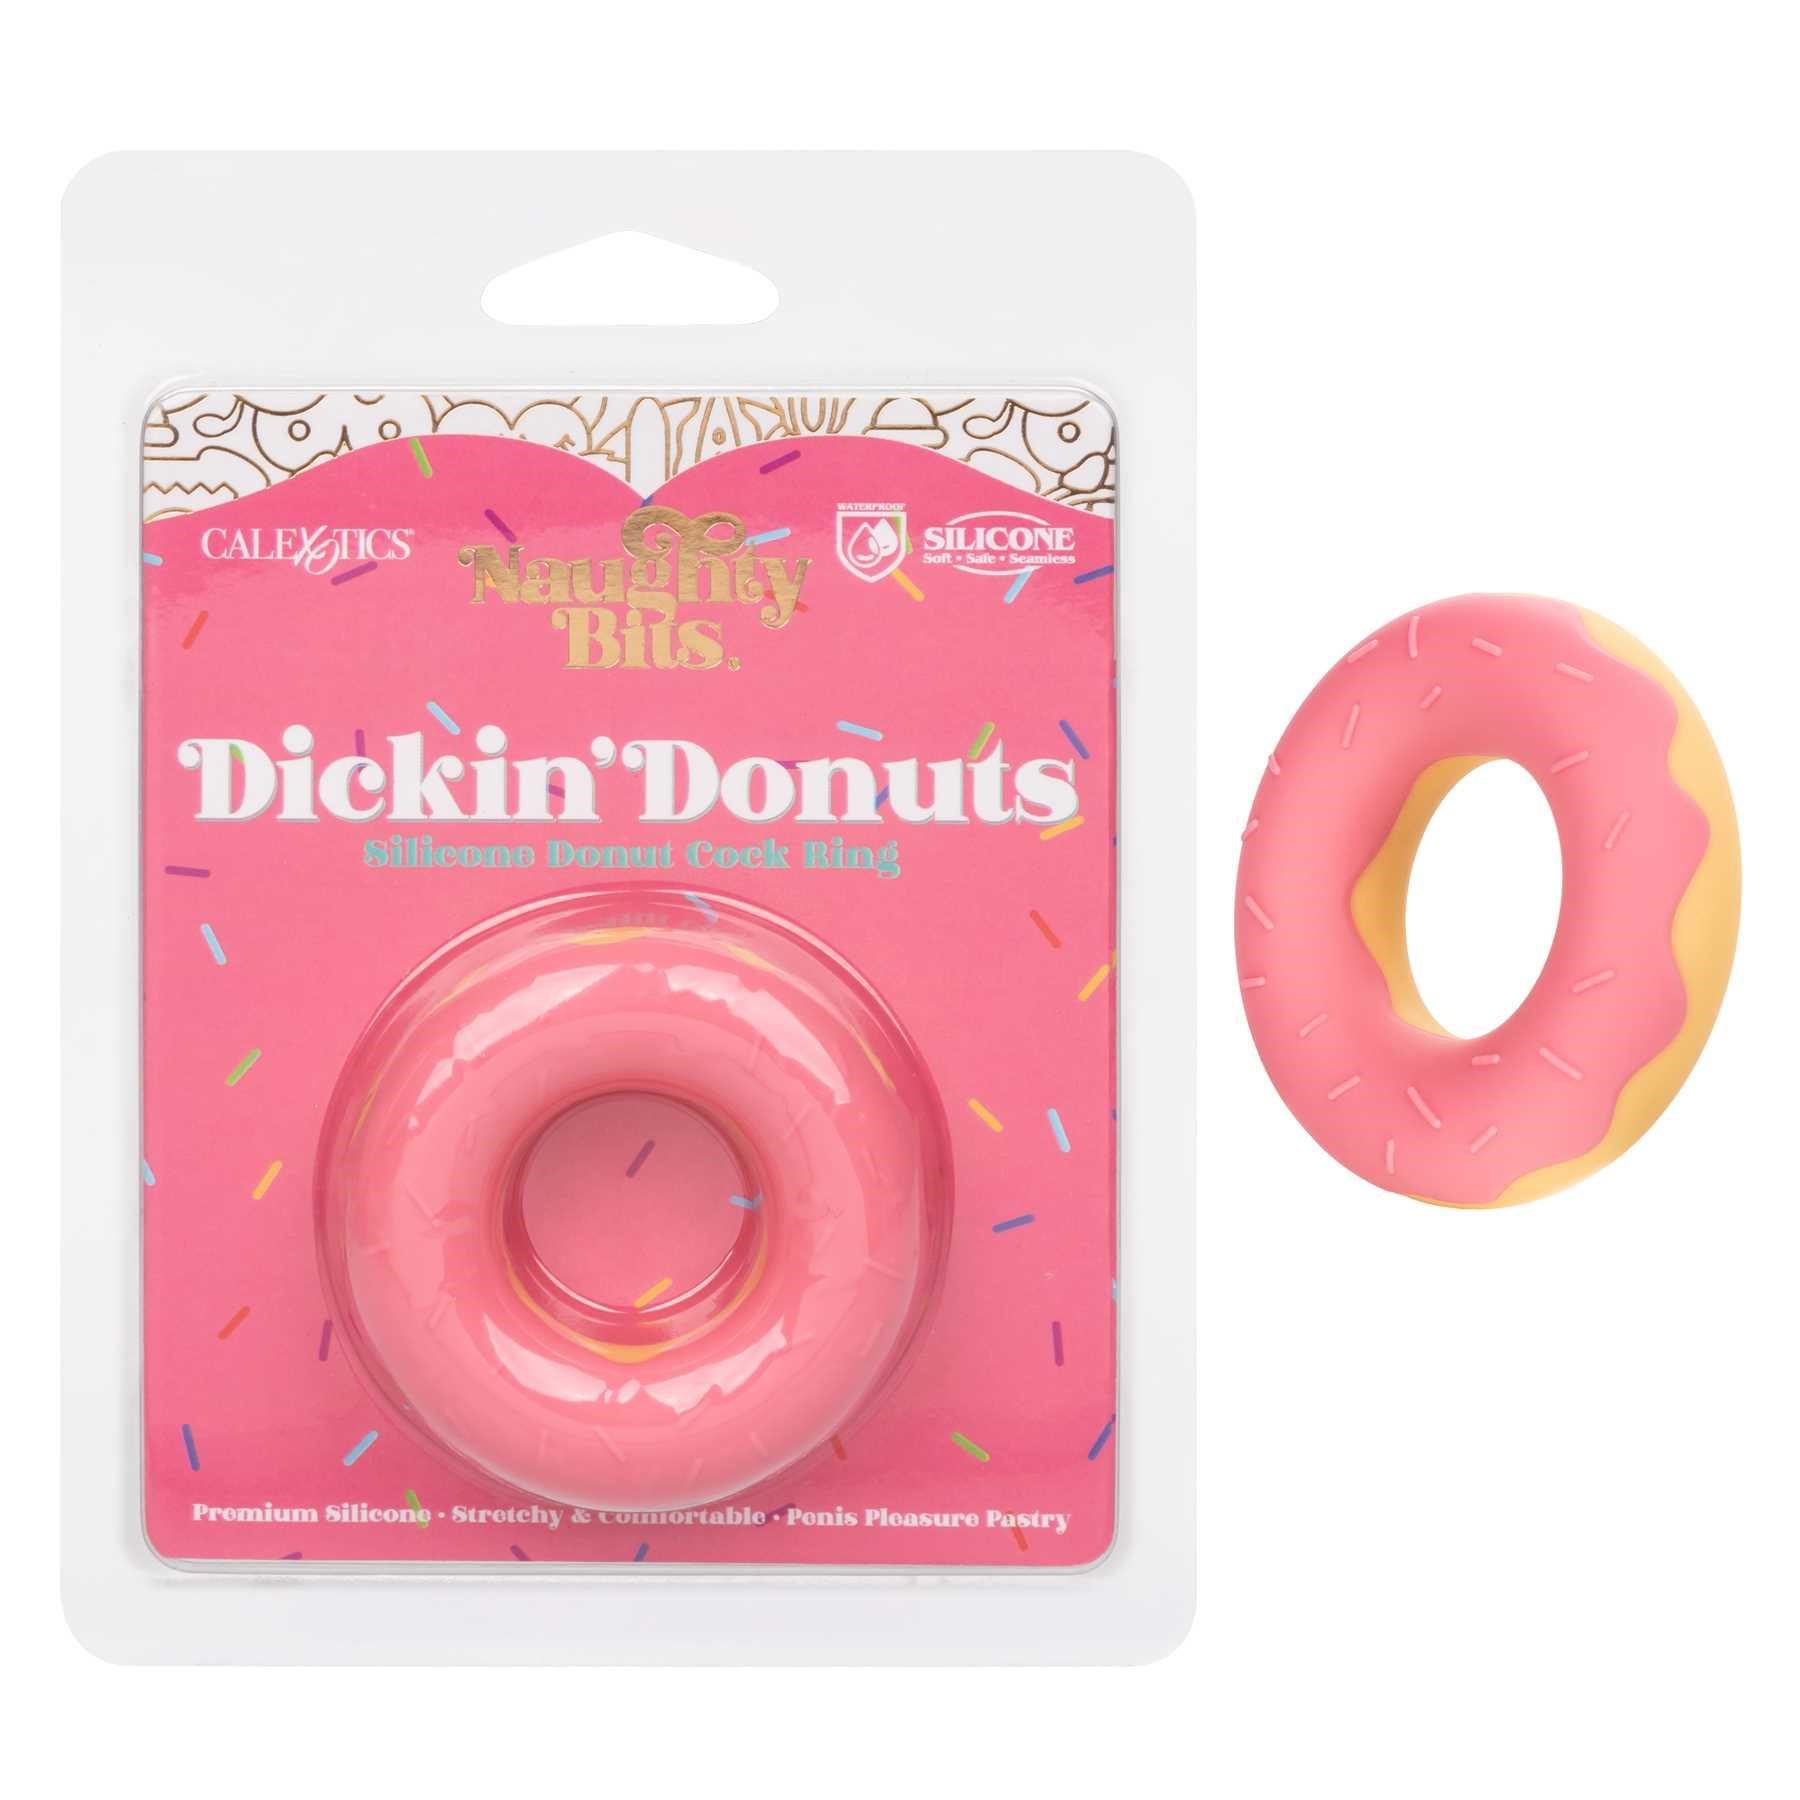 Naughty Bits Dickin' Donuts Silicone Donut Cock Ring packaging